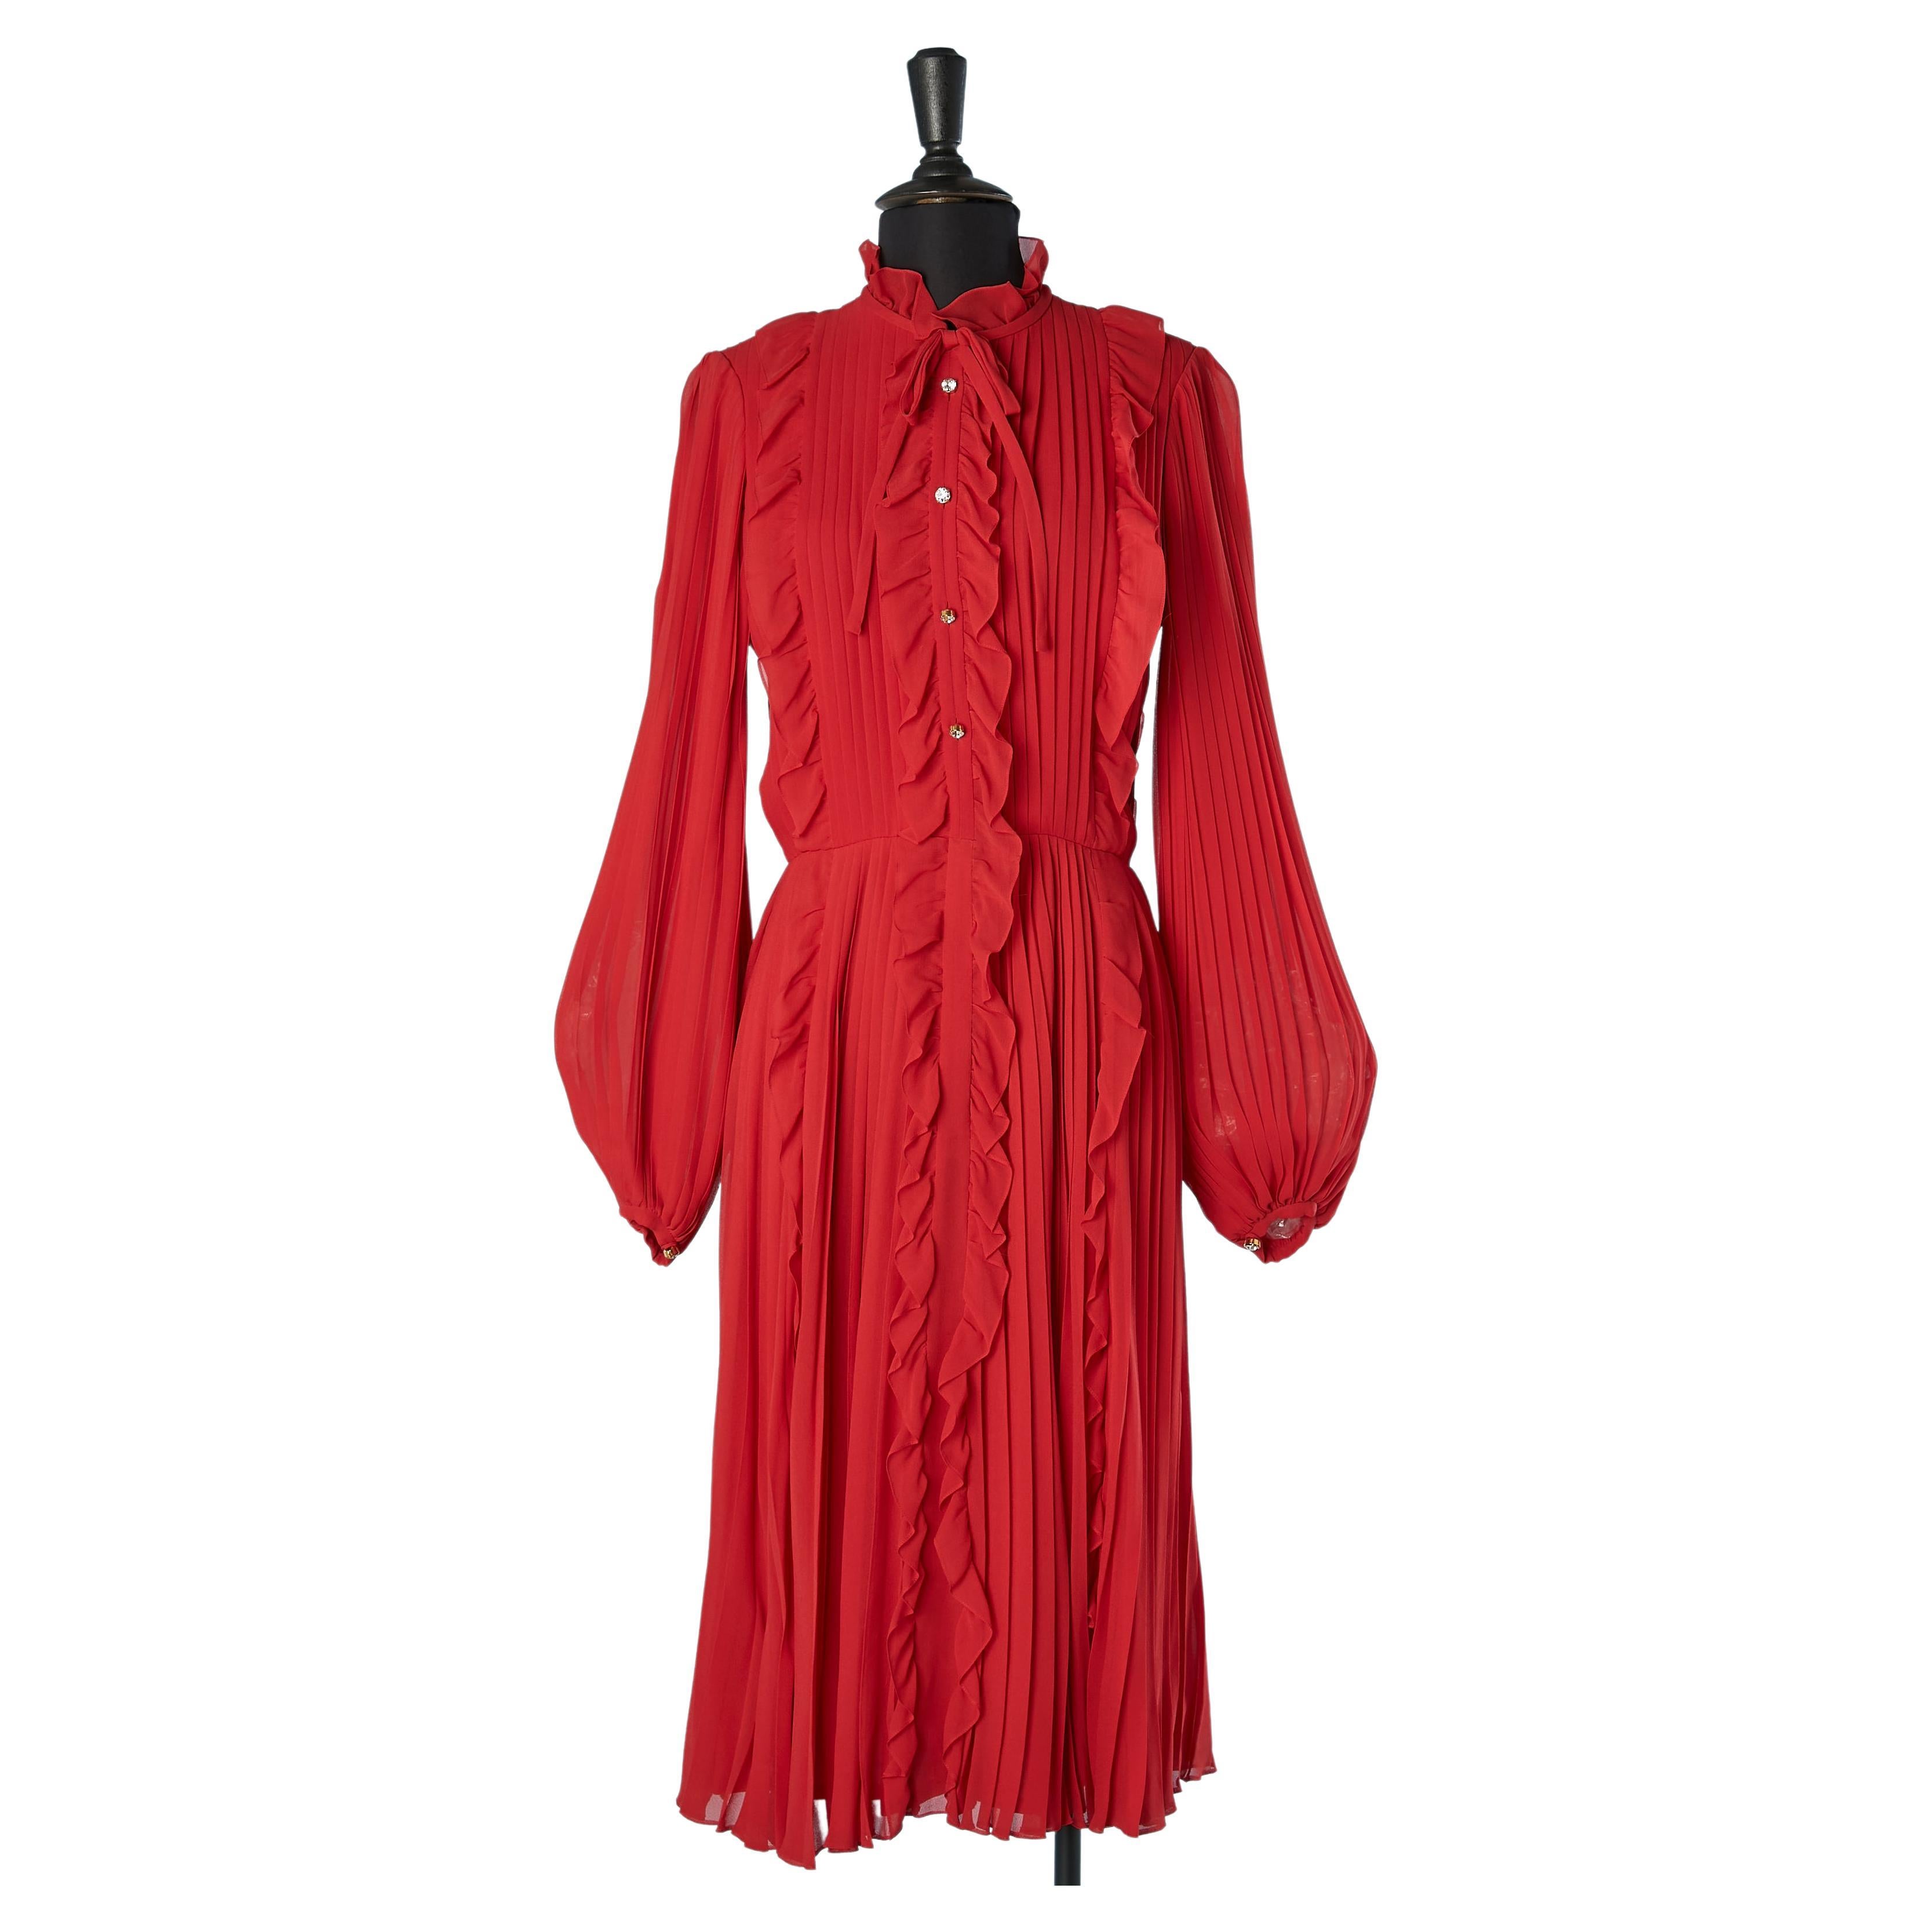 Red silk chiffon pleated cocktail dress with ruffles Philippe Venet Circa 1970 For Sale